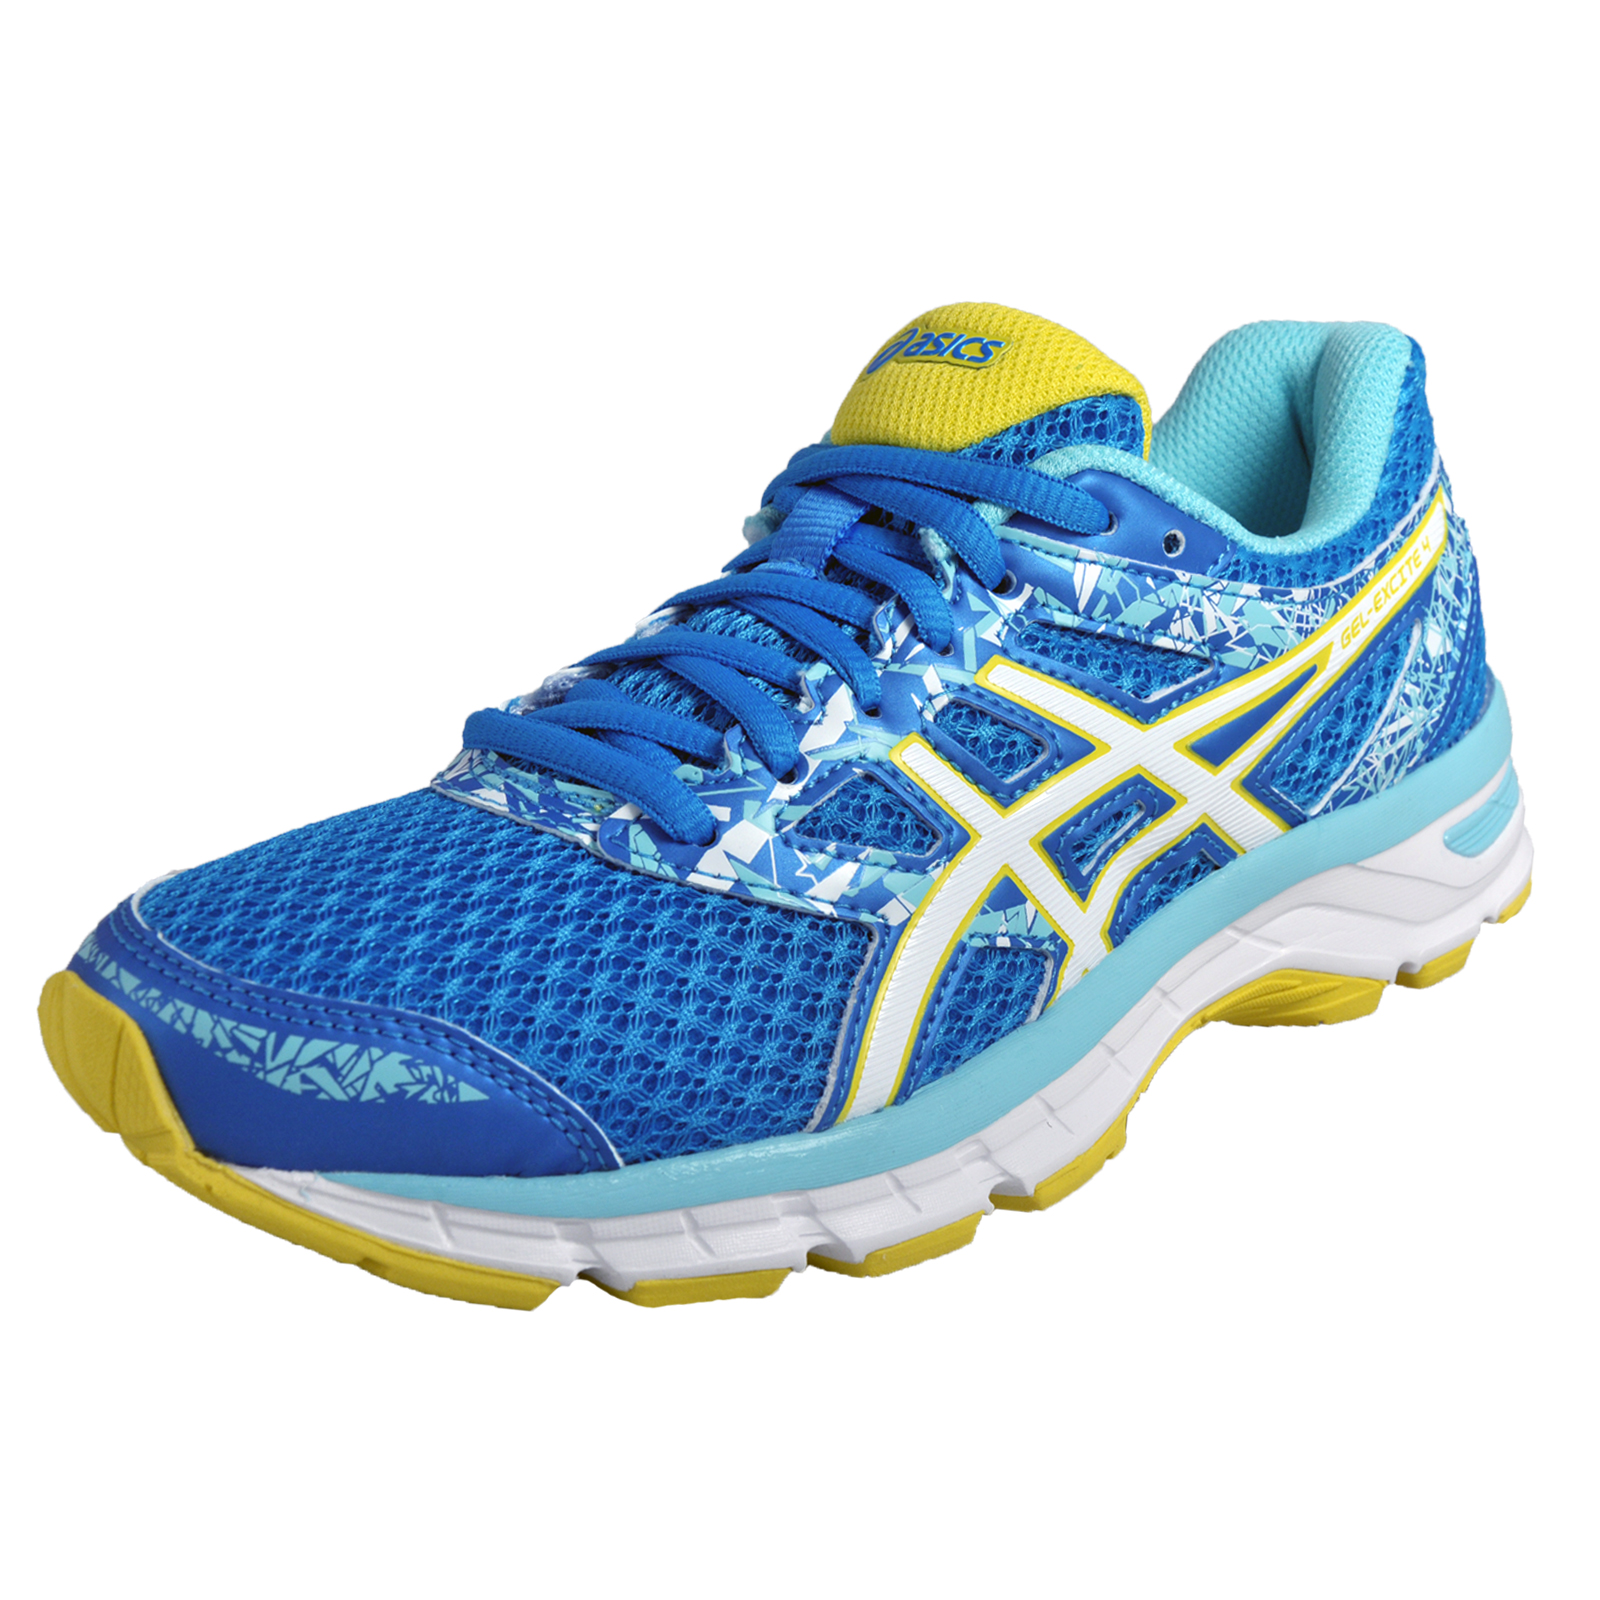 Asics Gel Excite 4 Womens Premium Running Shoes Fitness Gym Trainers Blue Ebay